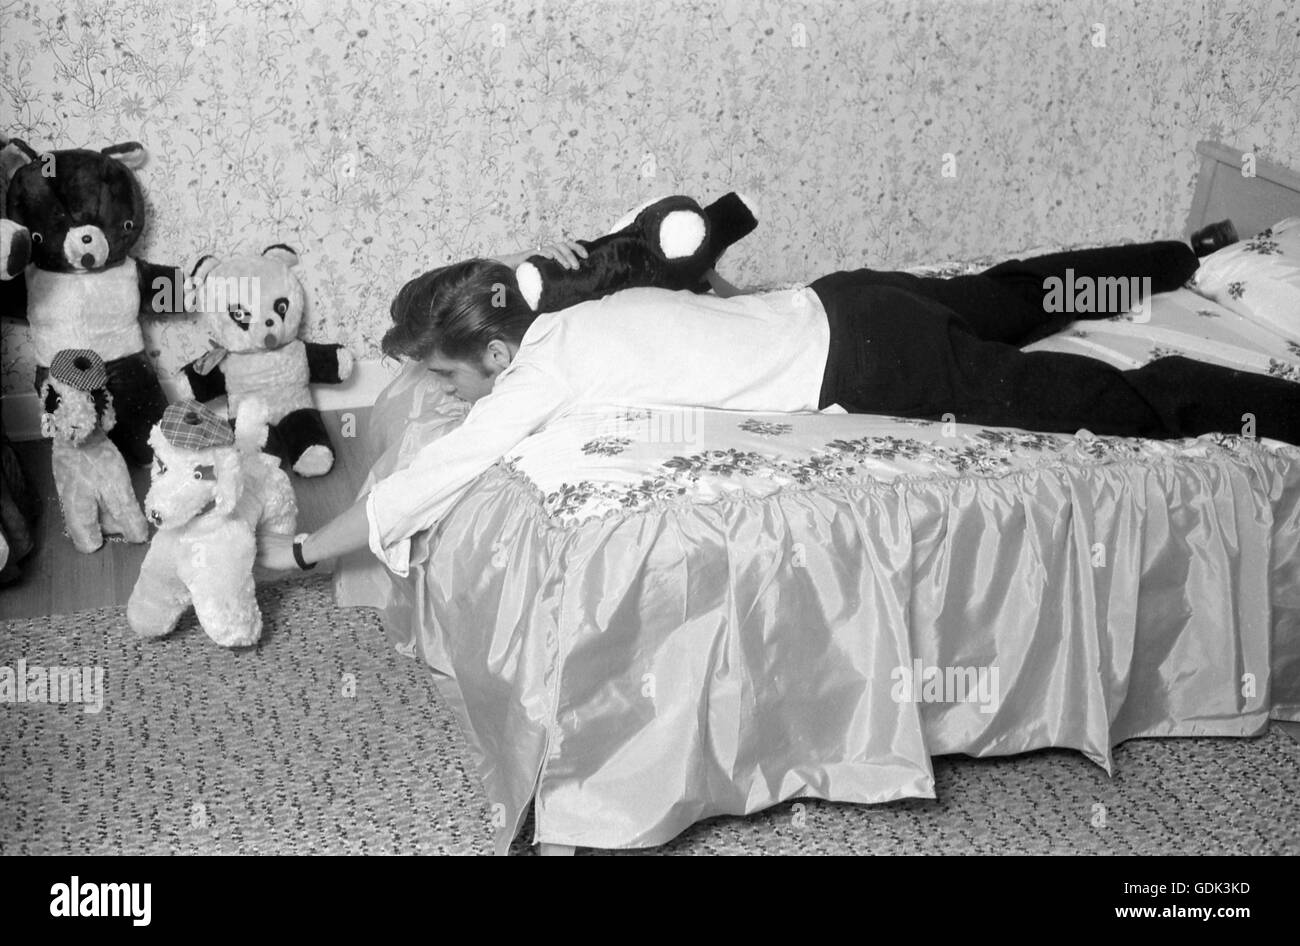 Elvis Presley at home, with teddy bears Stock Photo